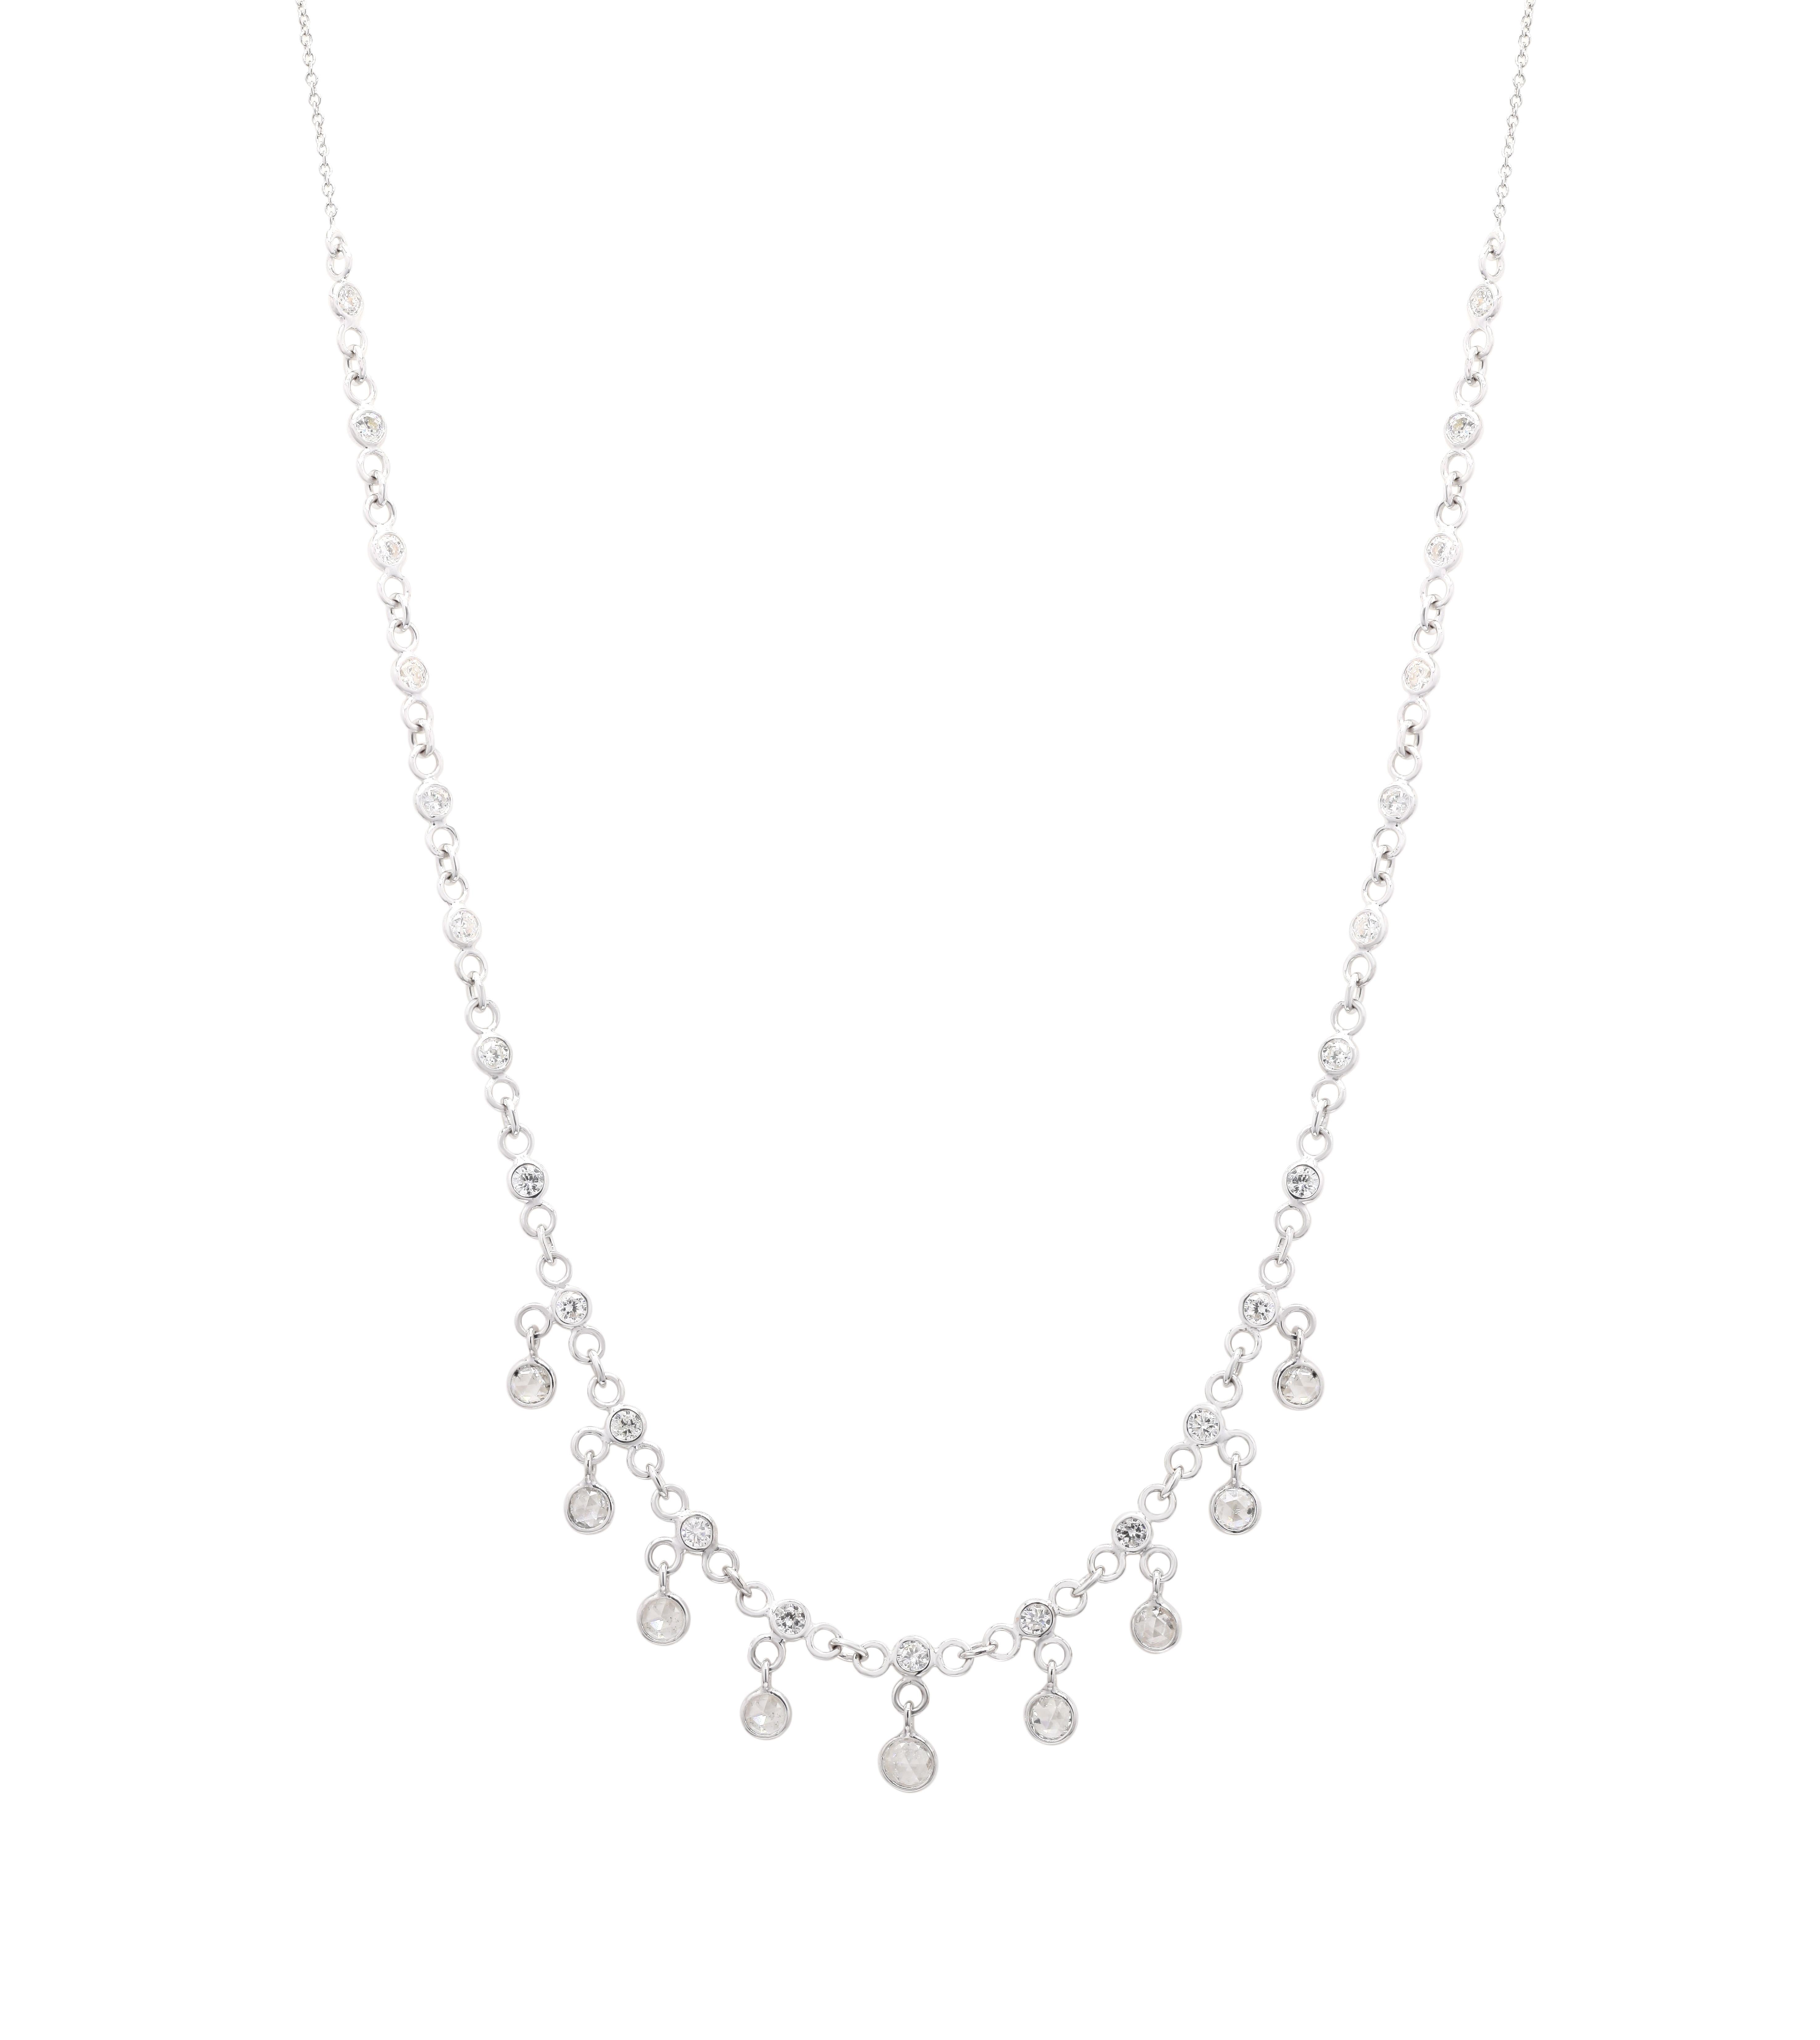 Round Cut 18k White Gold 2.6 Carat Genuine Diamond Chain Necklace, Christmas Gifts For Her For Sale